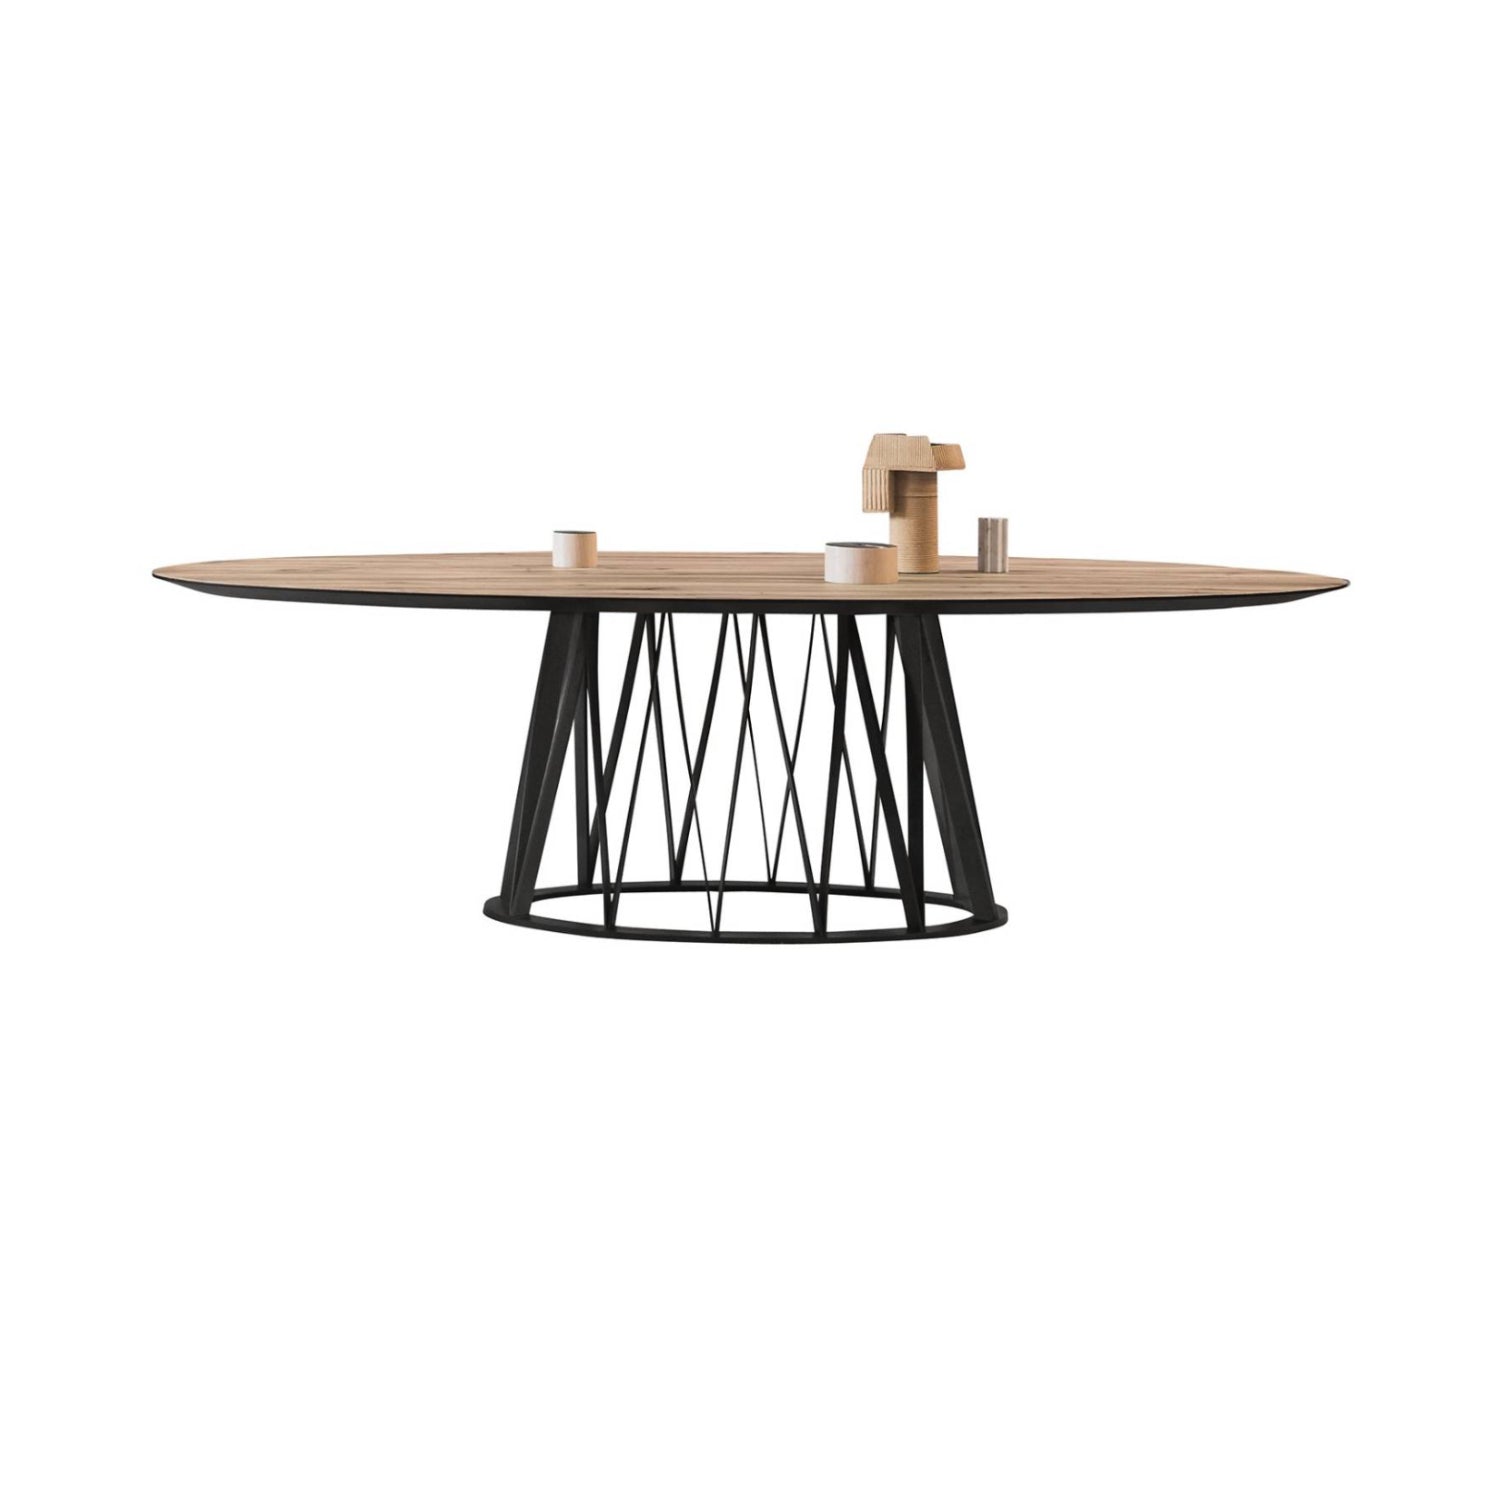 Acco Oval Dining Table: Small + Canaletto Walnut + Black Ash